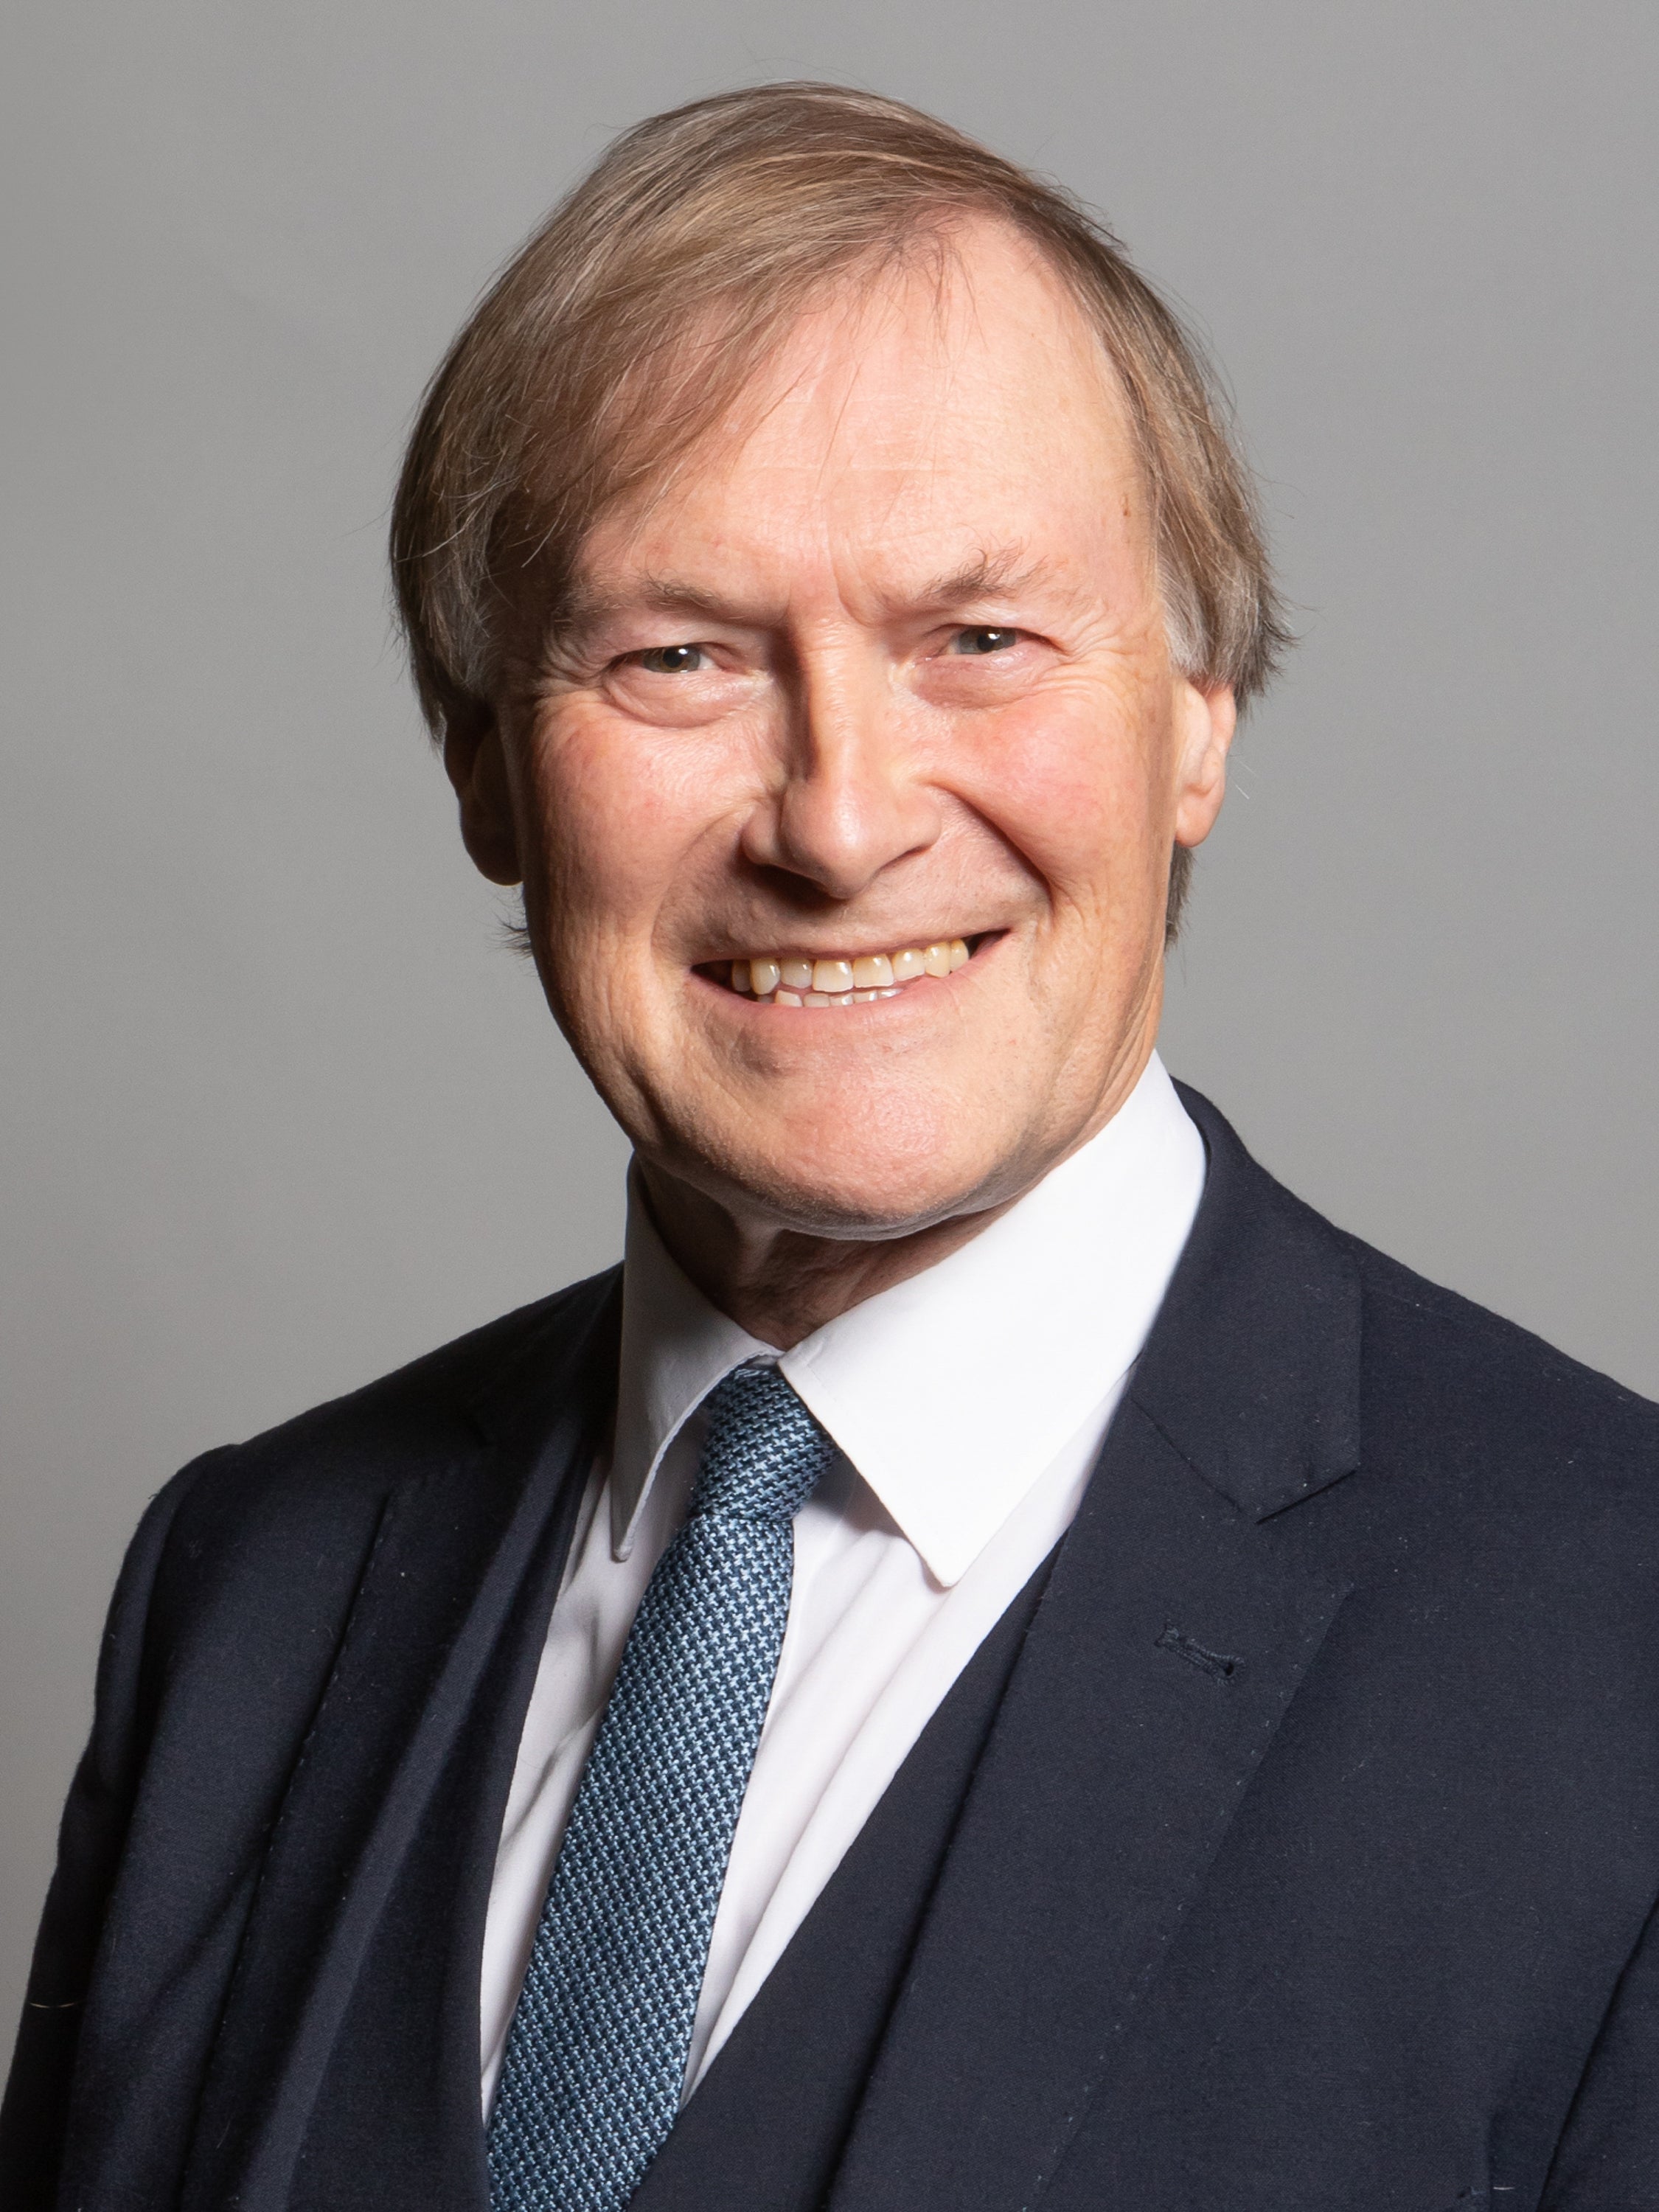 Veteran Conservative MP Sir David Amess was fatally stabbed during a constituency surgery in Leigh-on-Sea, Essex